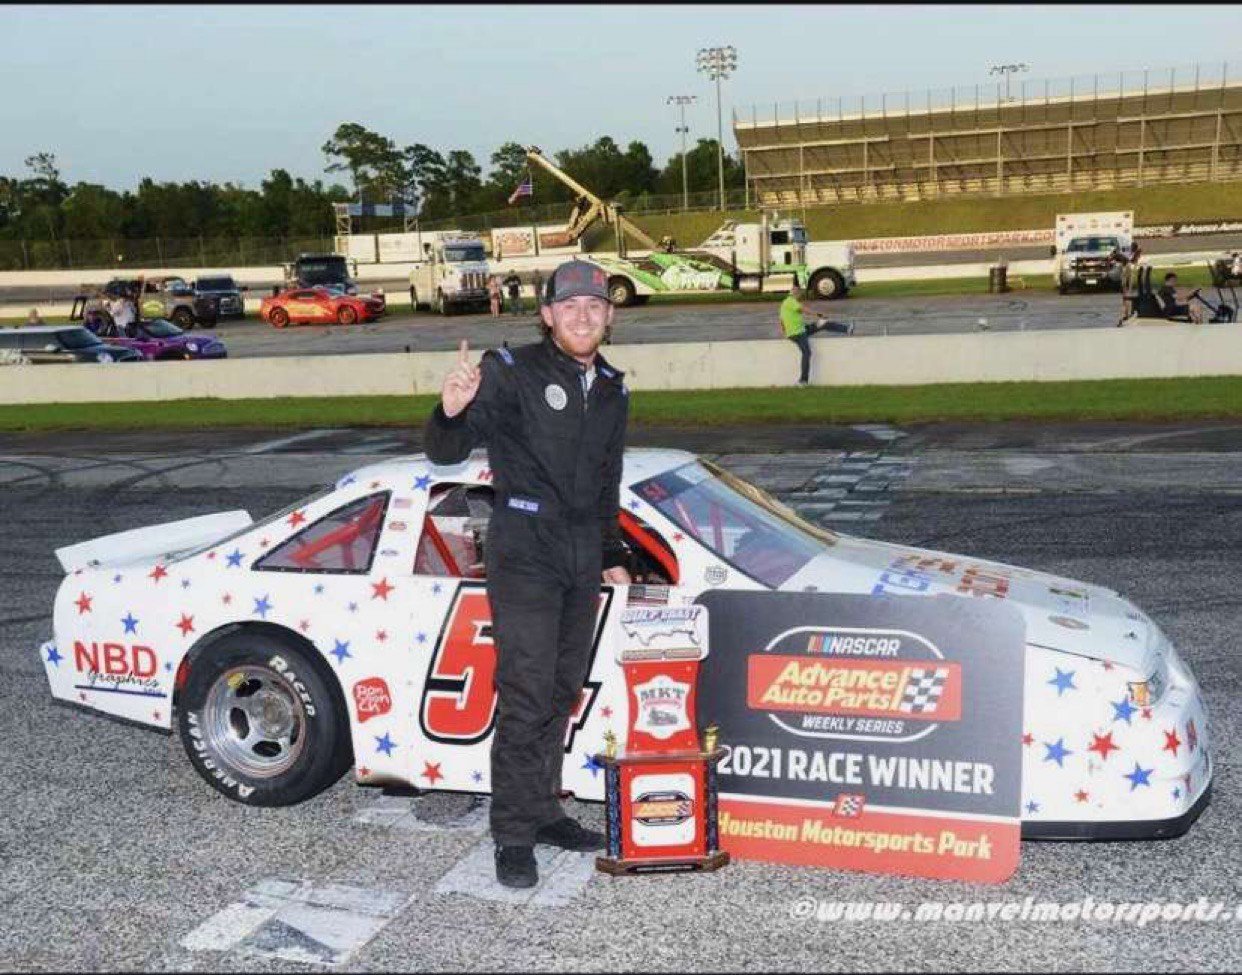 Ty Hymel stands in victory lane at Houston Motorsports Park after winning the NASCAR Advanced Auto Parts Weekly Series race on July 17, 2021.